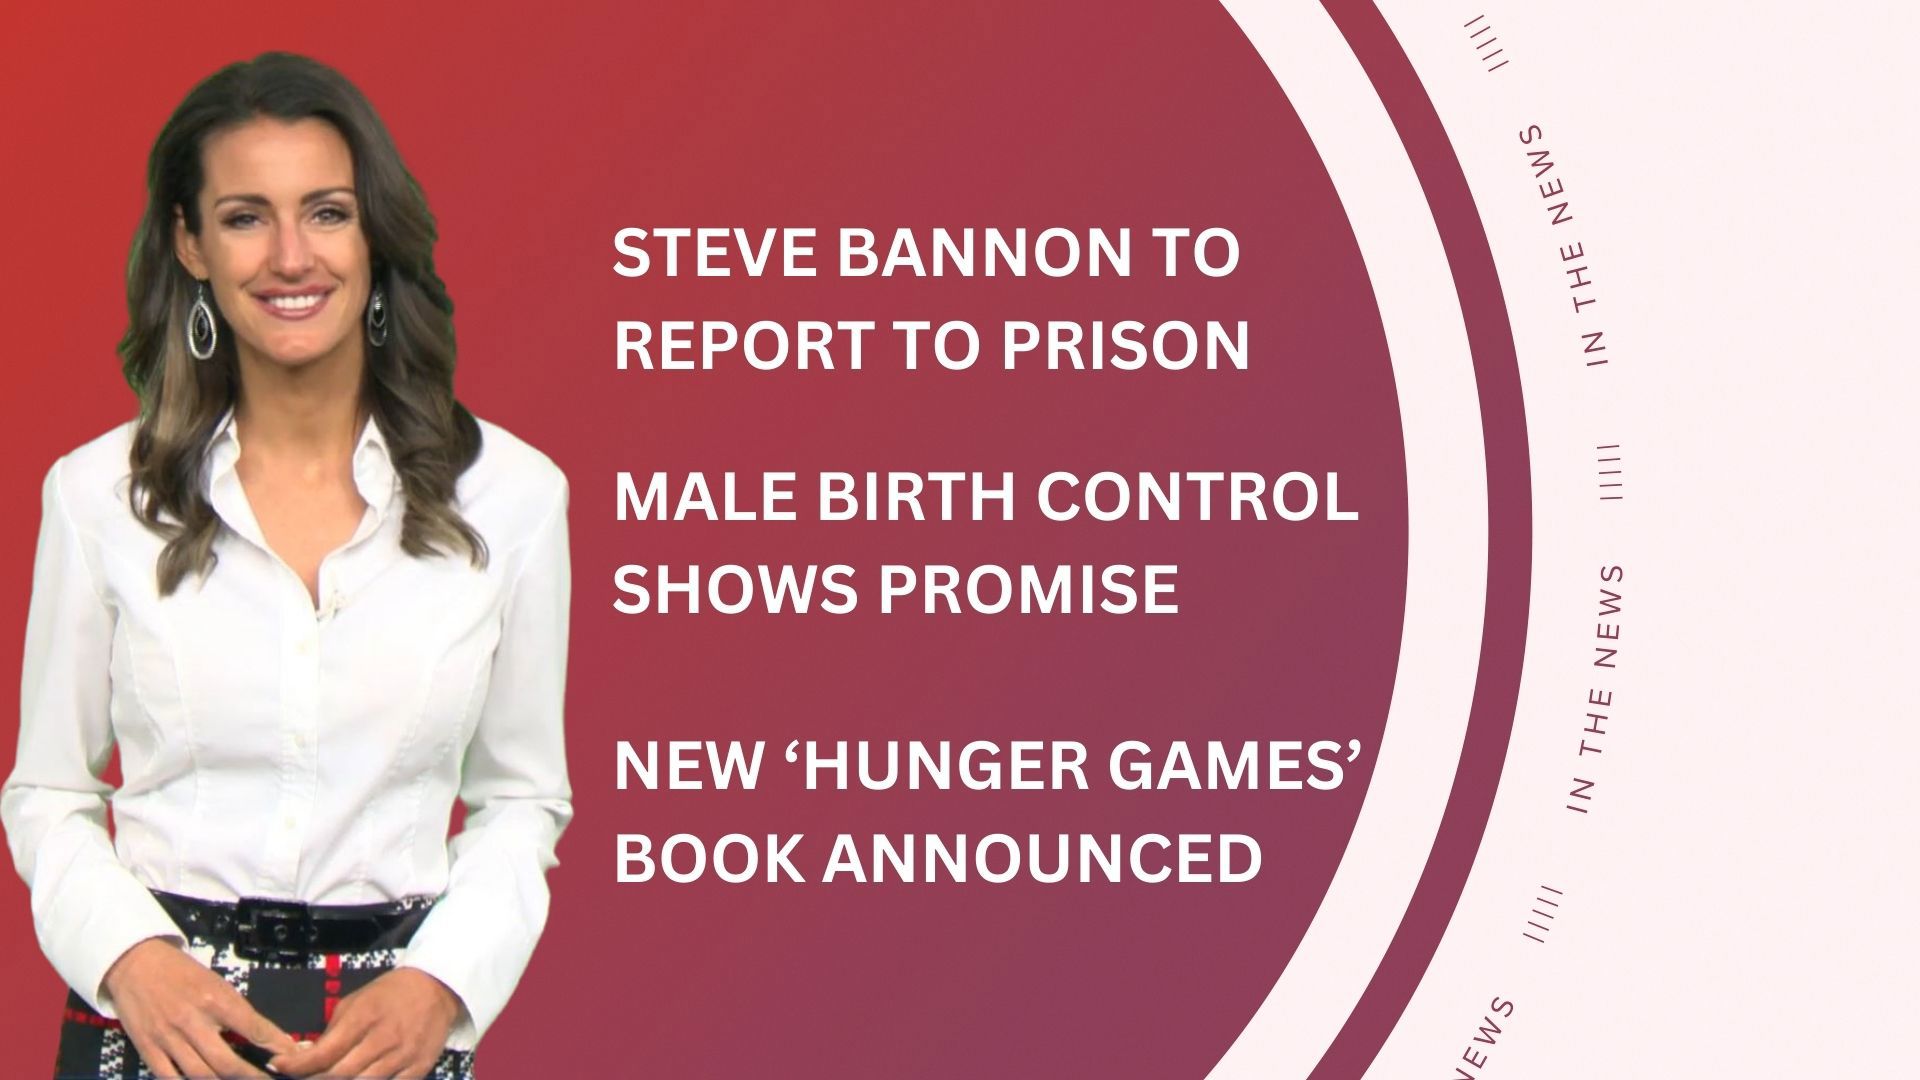 A look at what is happening in the news from Steve Bannon to report to prison on July 1 to promising results in men's contraception and a new 'Hunger Games' book.